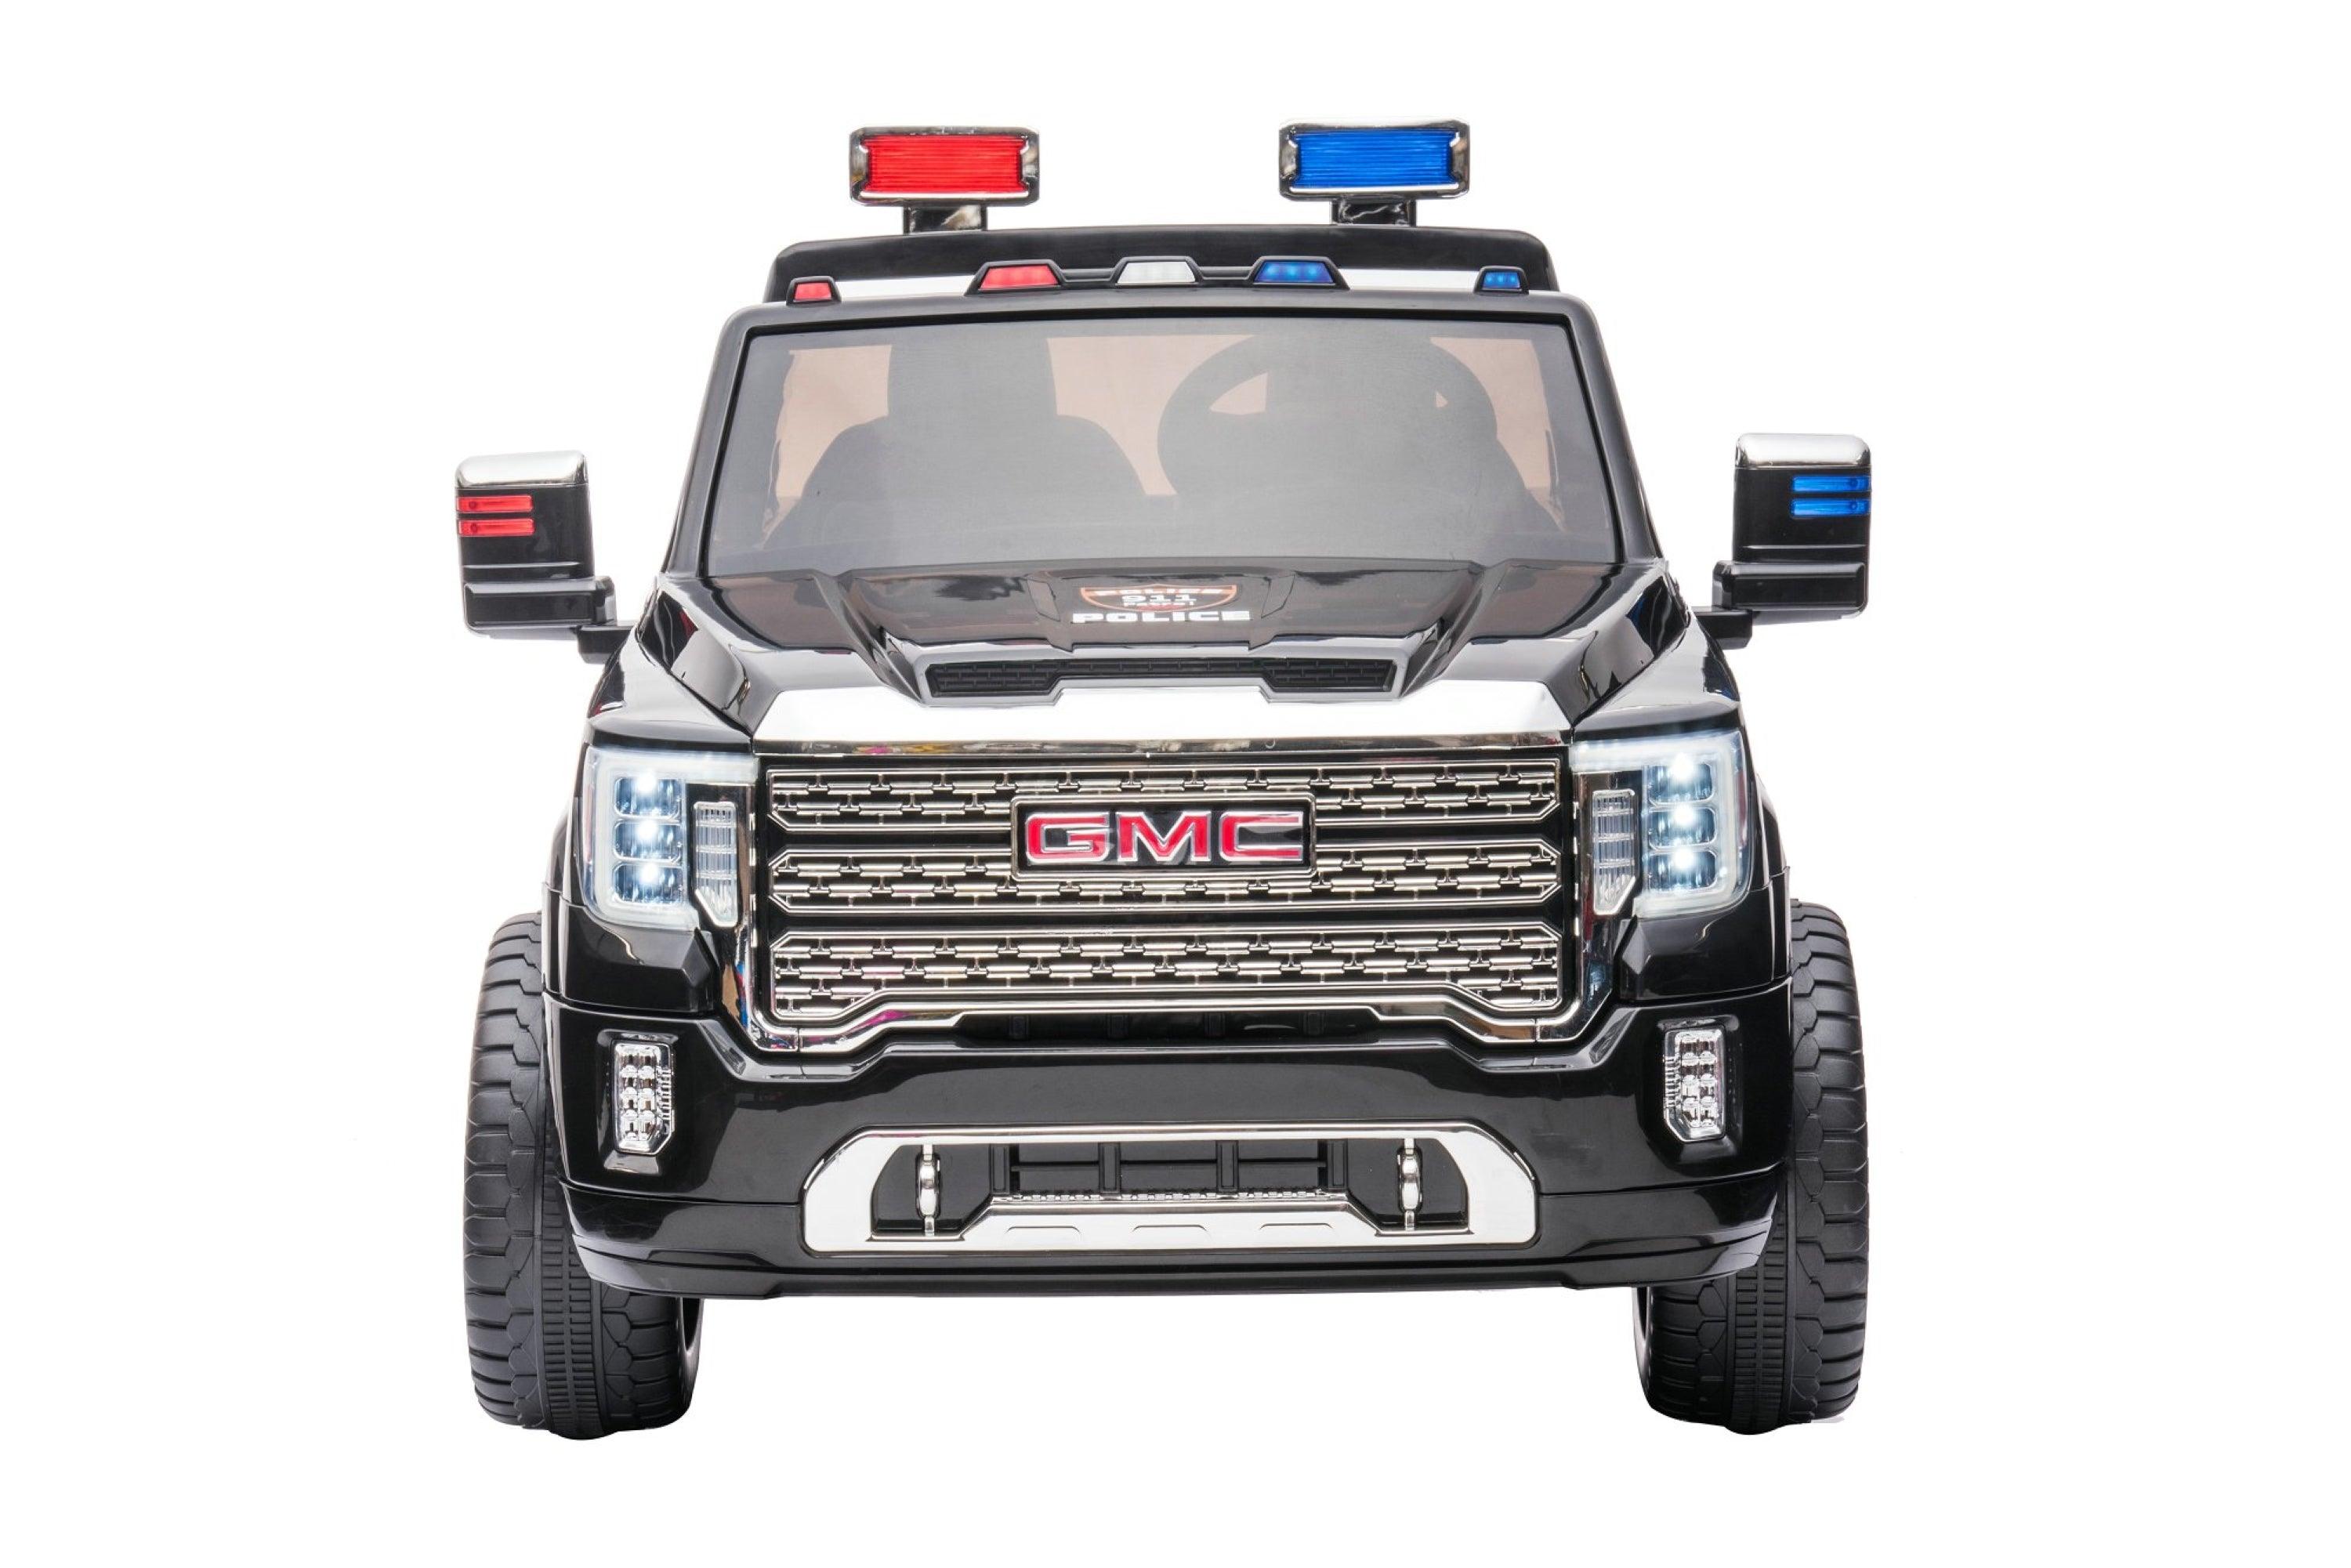 Available on February 28th 24V GMC Sierra Denali 2 Seater Police Ride-On Truck